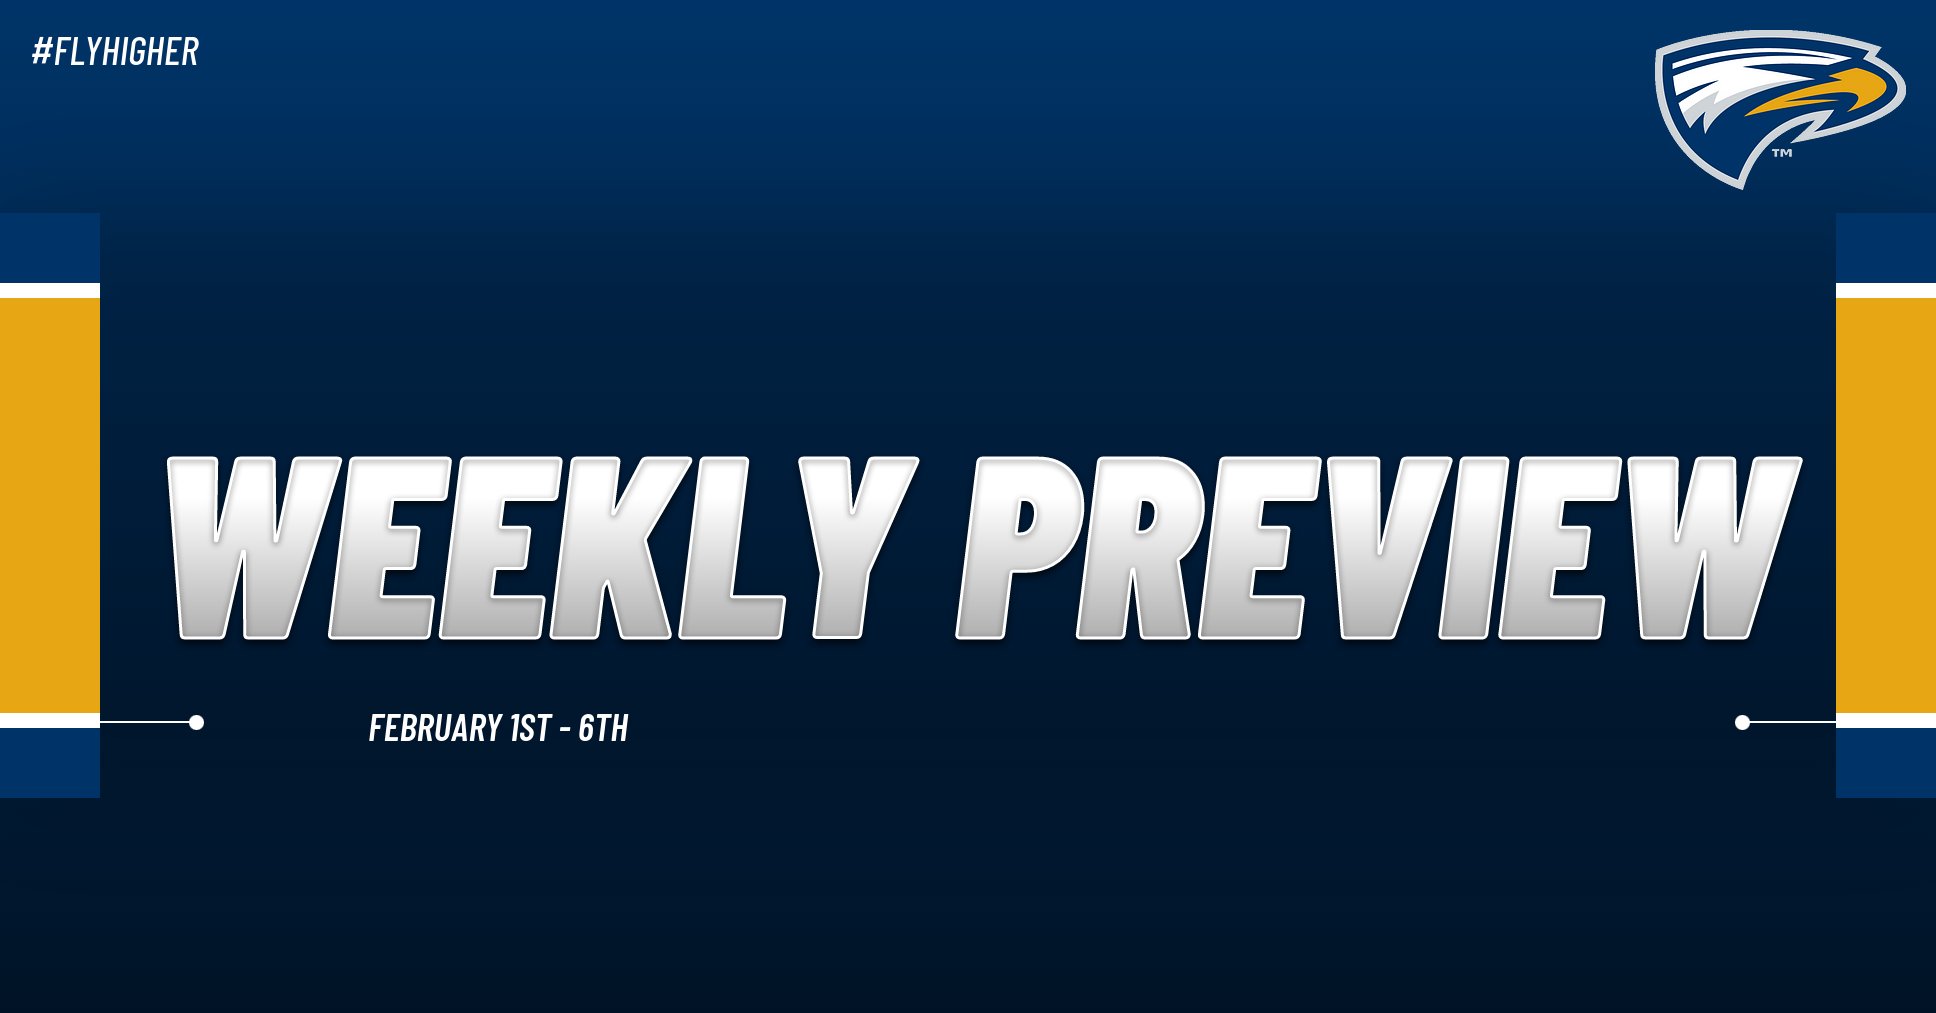 Emory Athletics Weekly Preview - February 1st - 6th